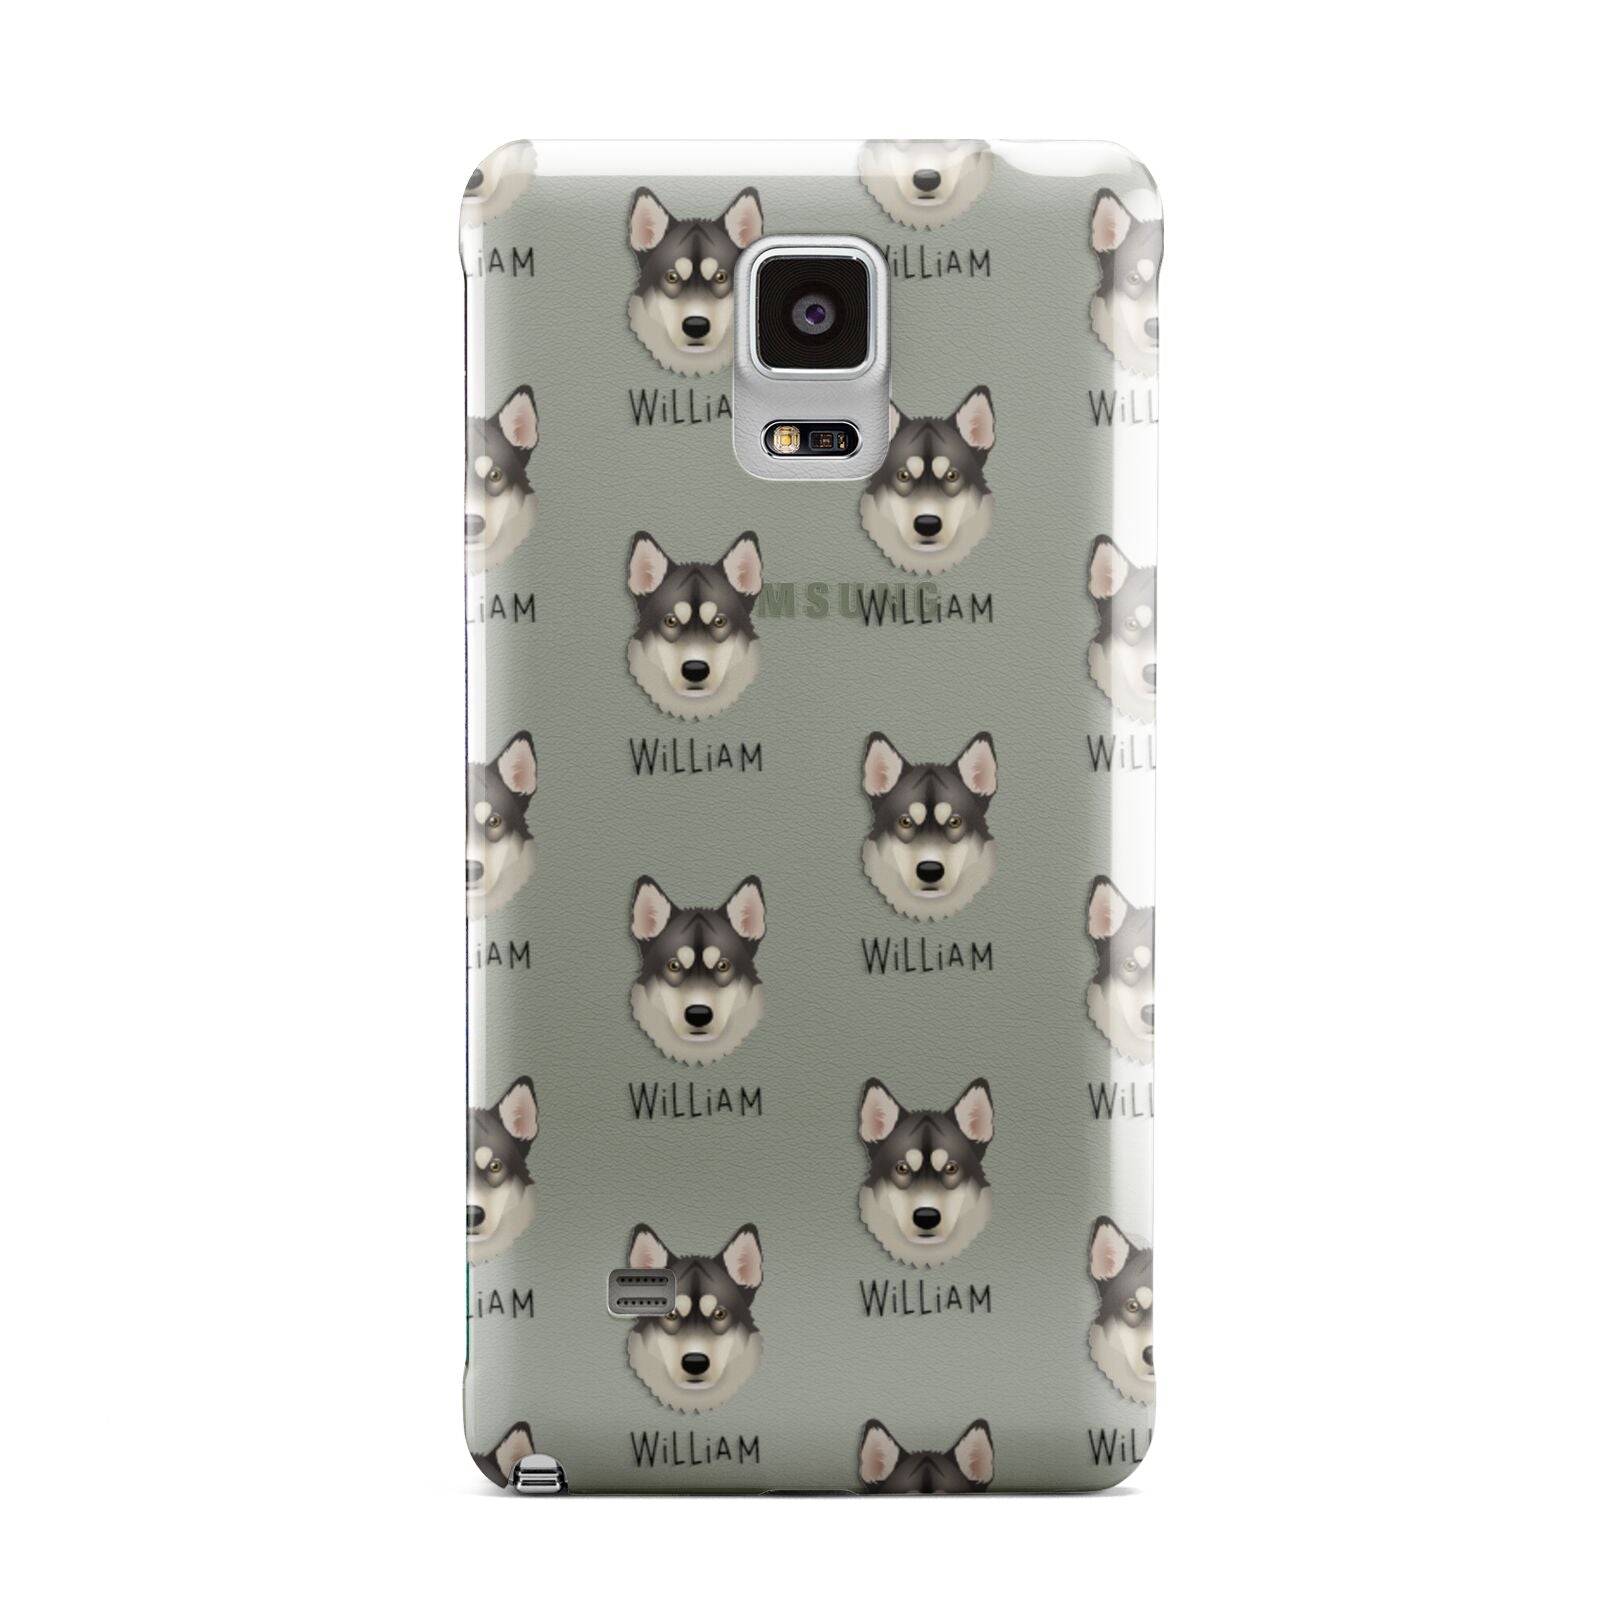 Tamaskan Icon with Name Samsung Galaxy Note 4 Case